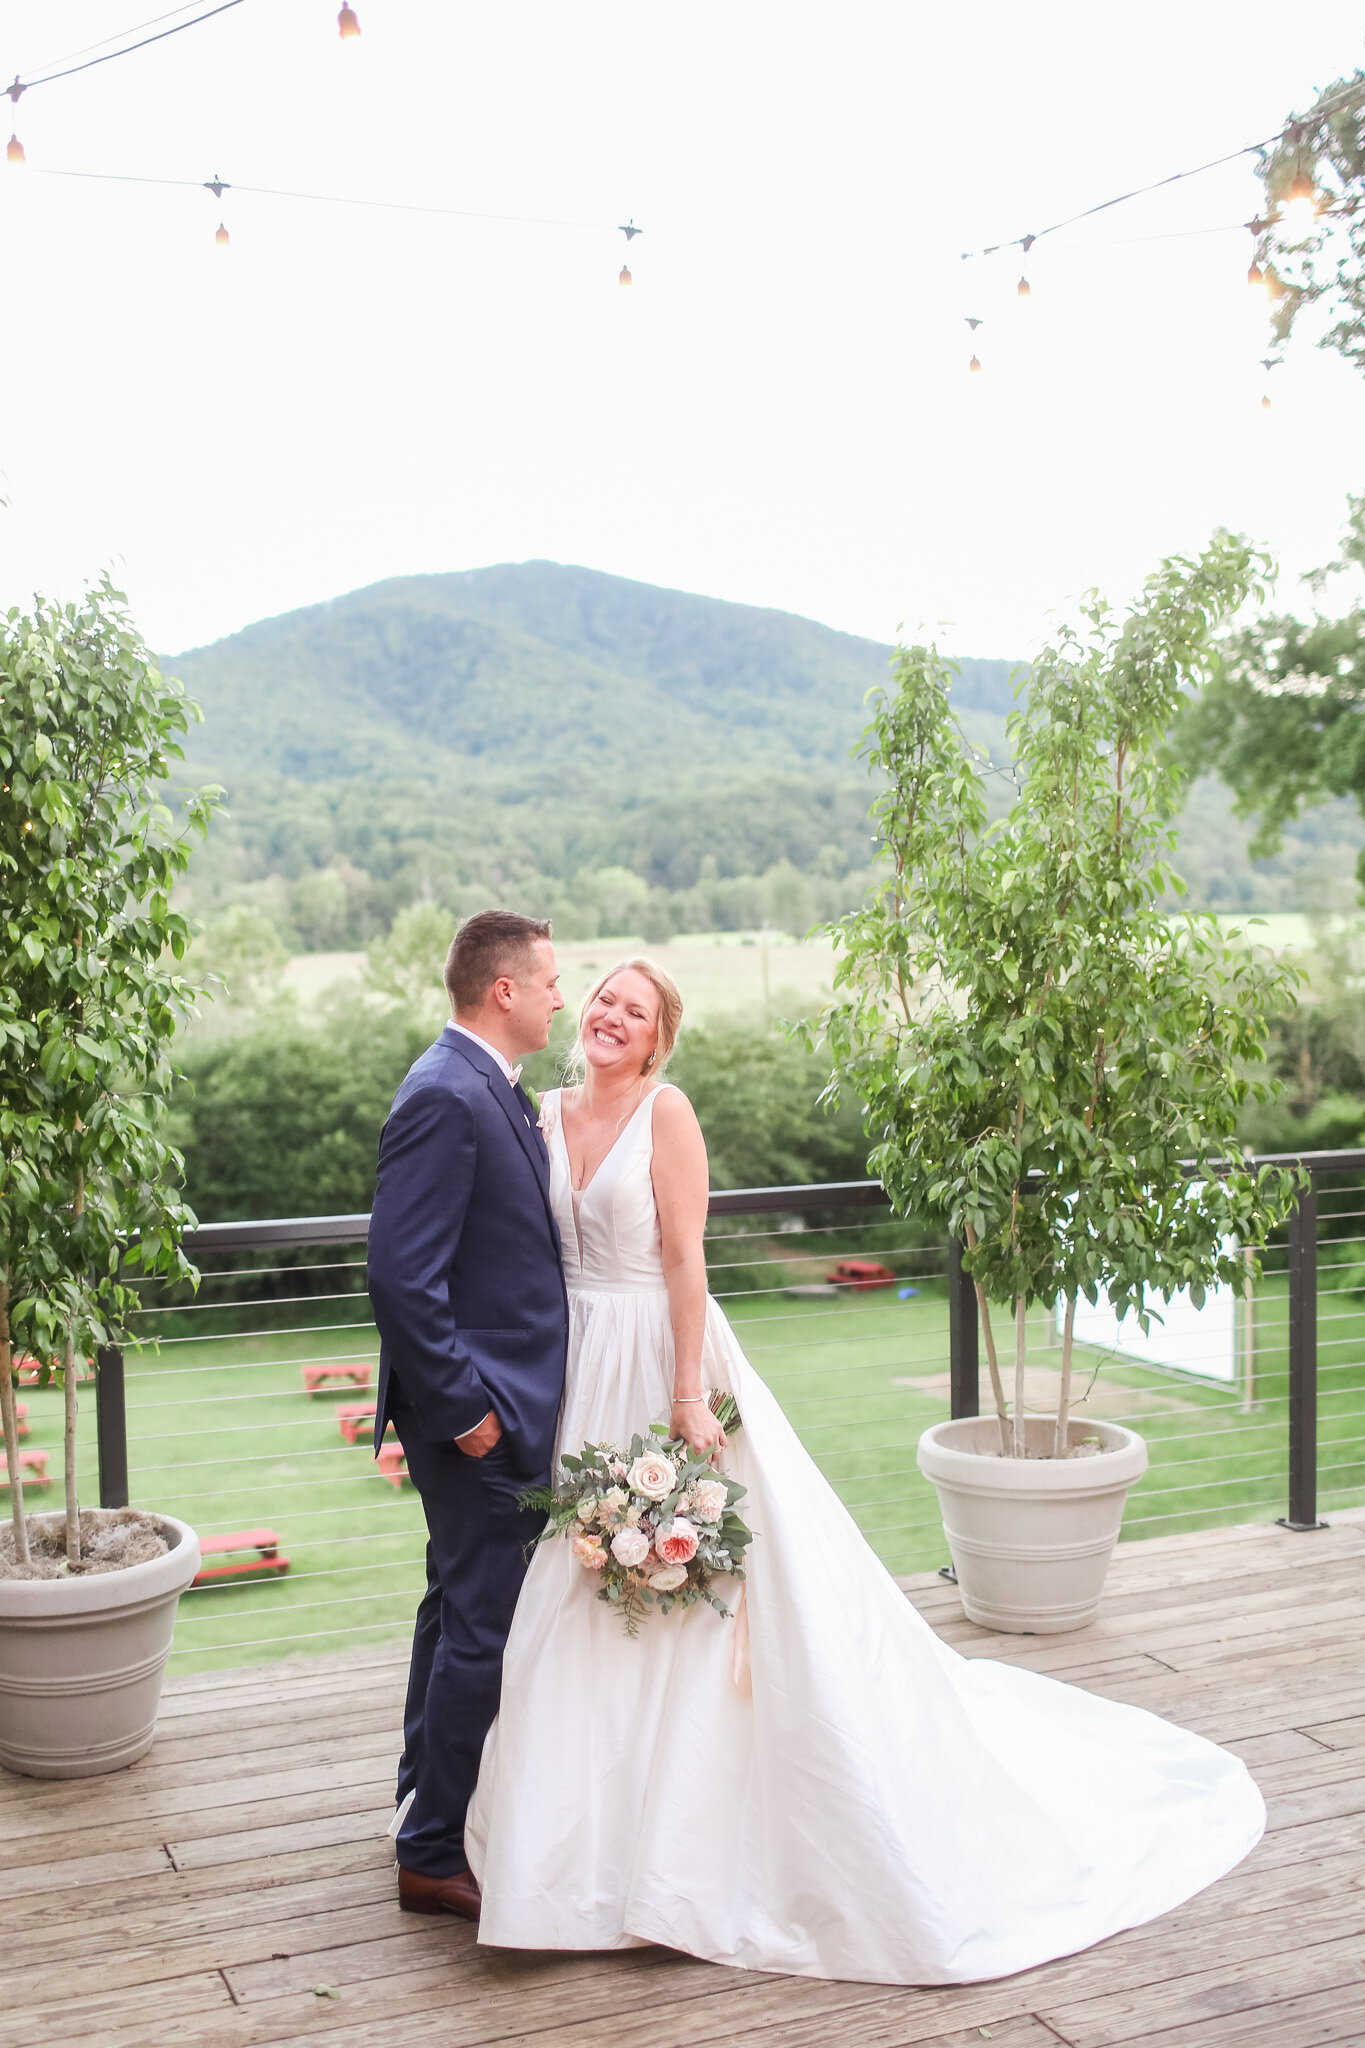 Classy Southern Fall Wedding at Bold Rock Cidery in Afton Virginia || Charlottesville and Lynchburg Wedding Photographer